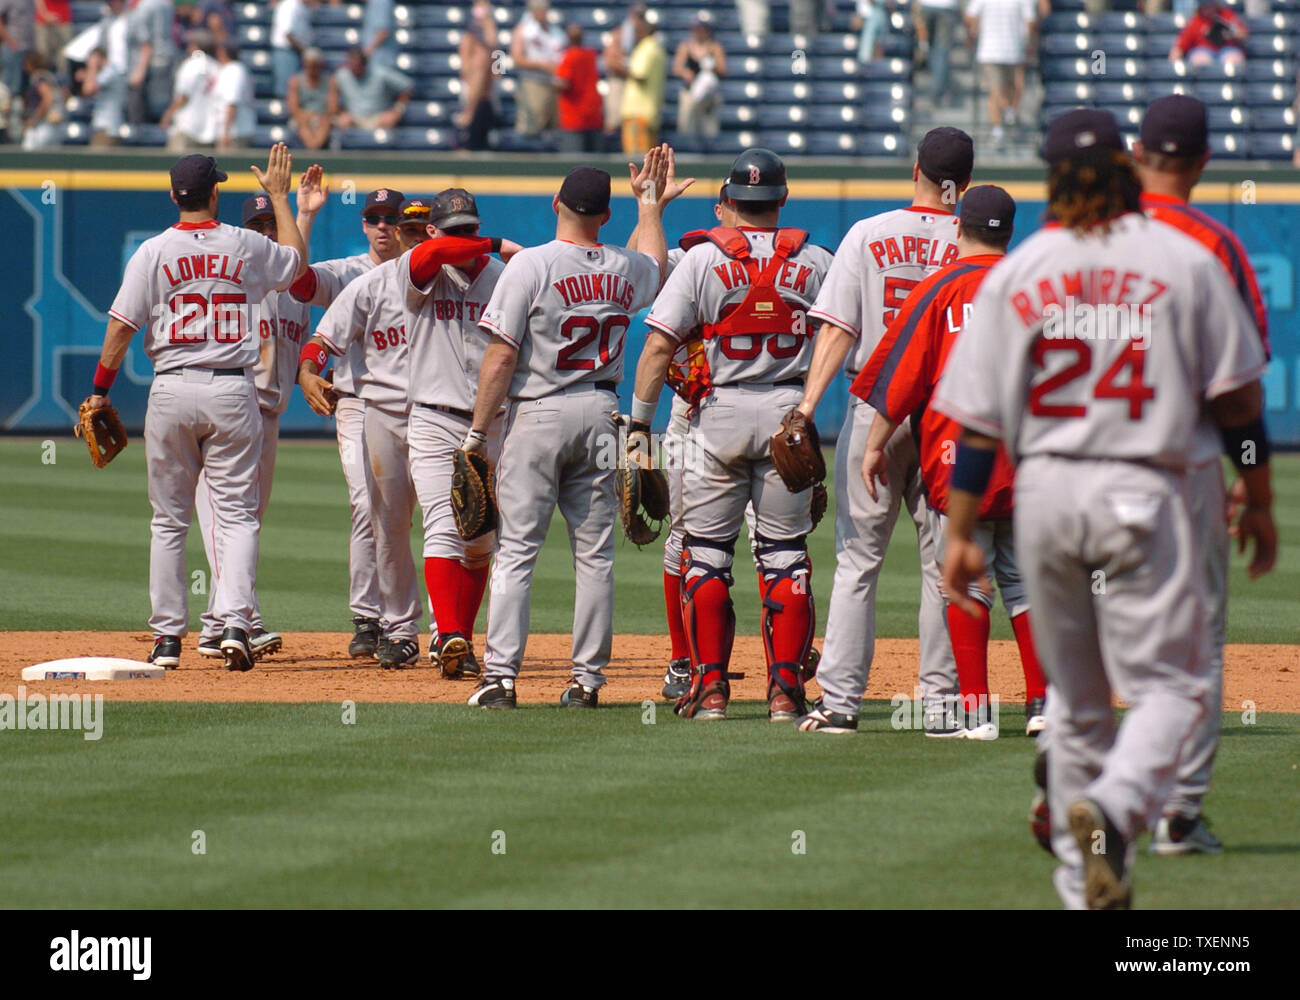 The Boston Red Sox celebrate a victory over the Atlanta Braves June 17, 2006, in Atlanta's Turner Field. The Red Sox defeated the Braves 5-3 (UPI Photo/John Dickerson) Stock Photo